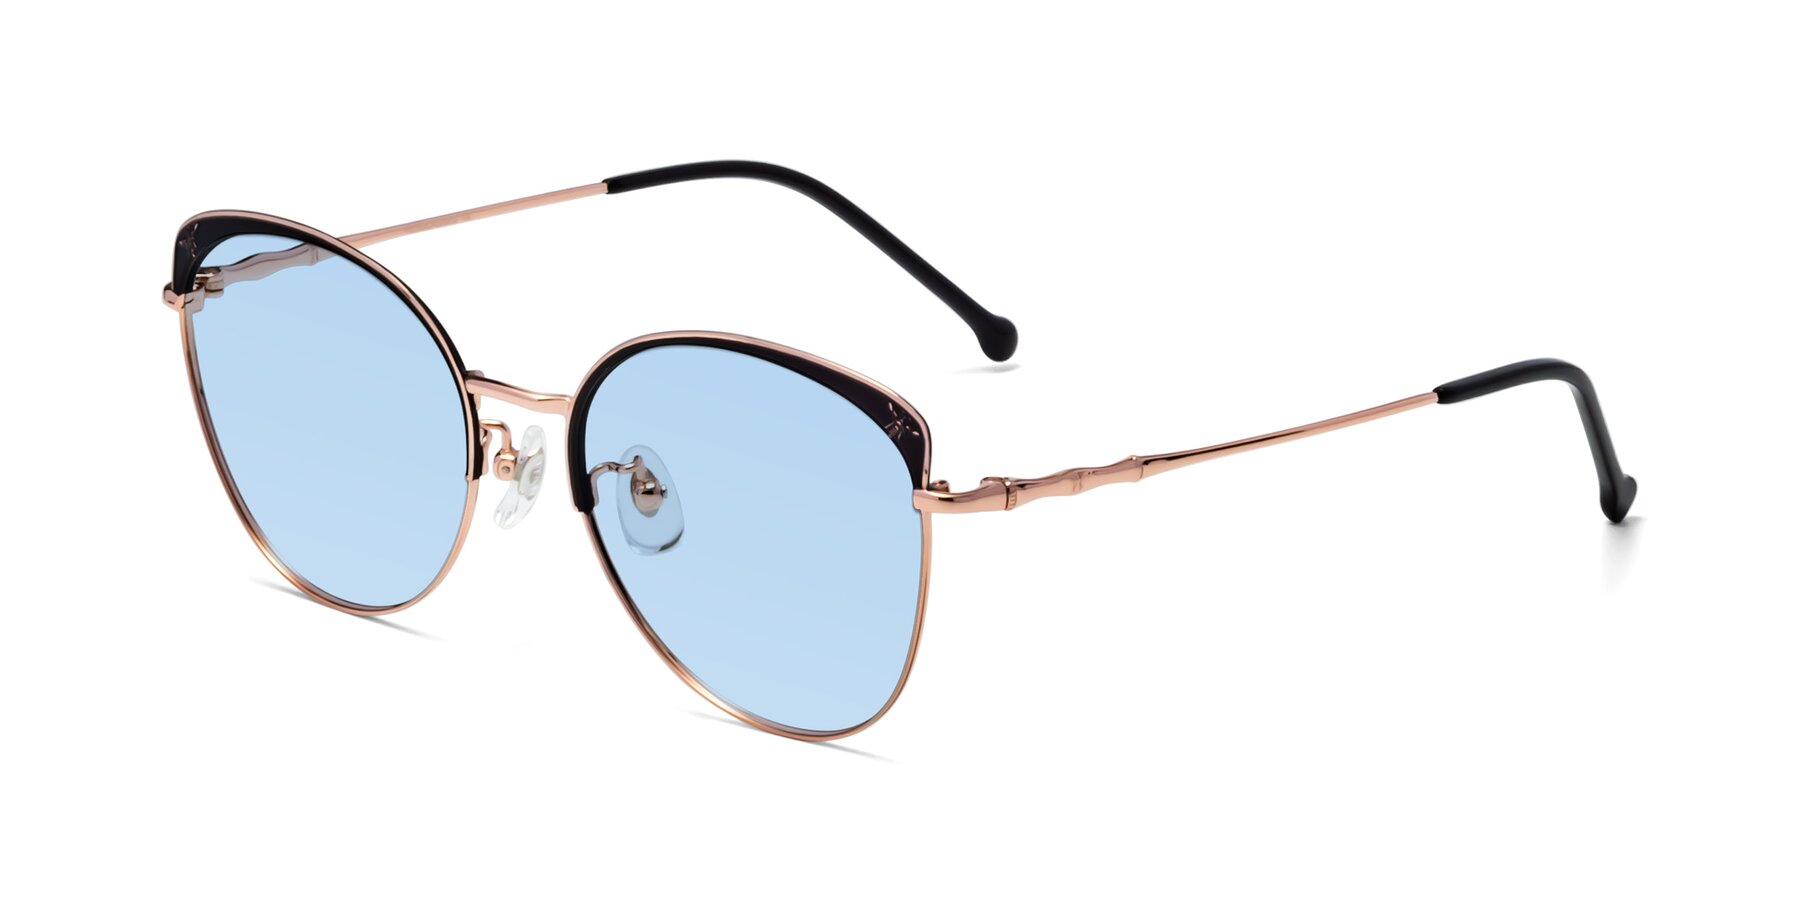 Angle of 18019 in Black-Rose Gold with Light Blue Tinted Lenses